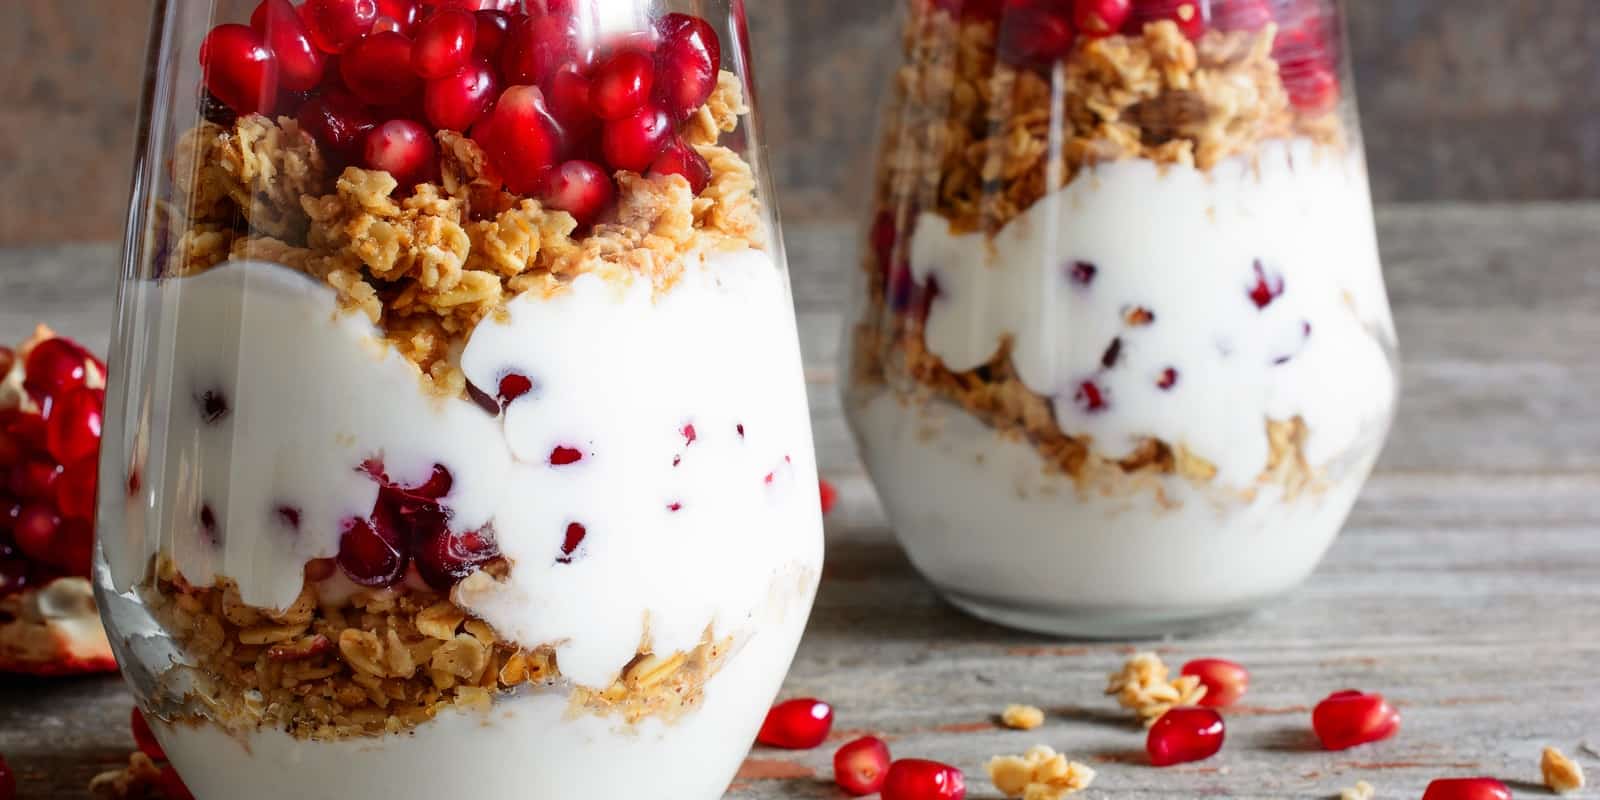 Yogurt Dessert Recipes That Are Great for Your Gut